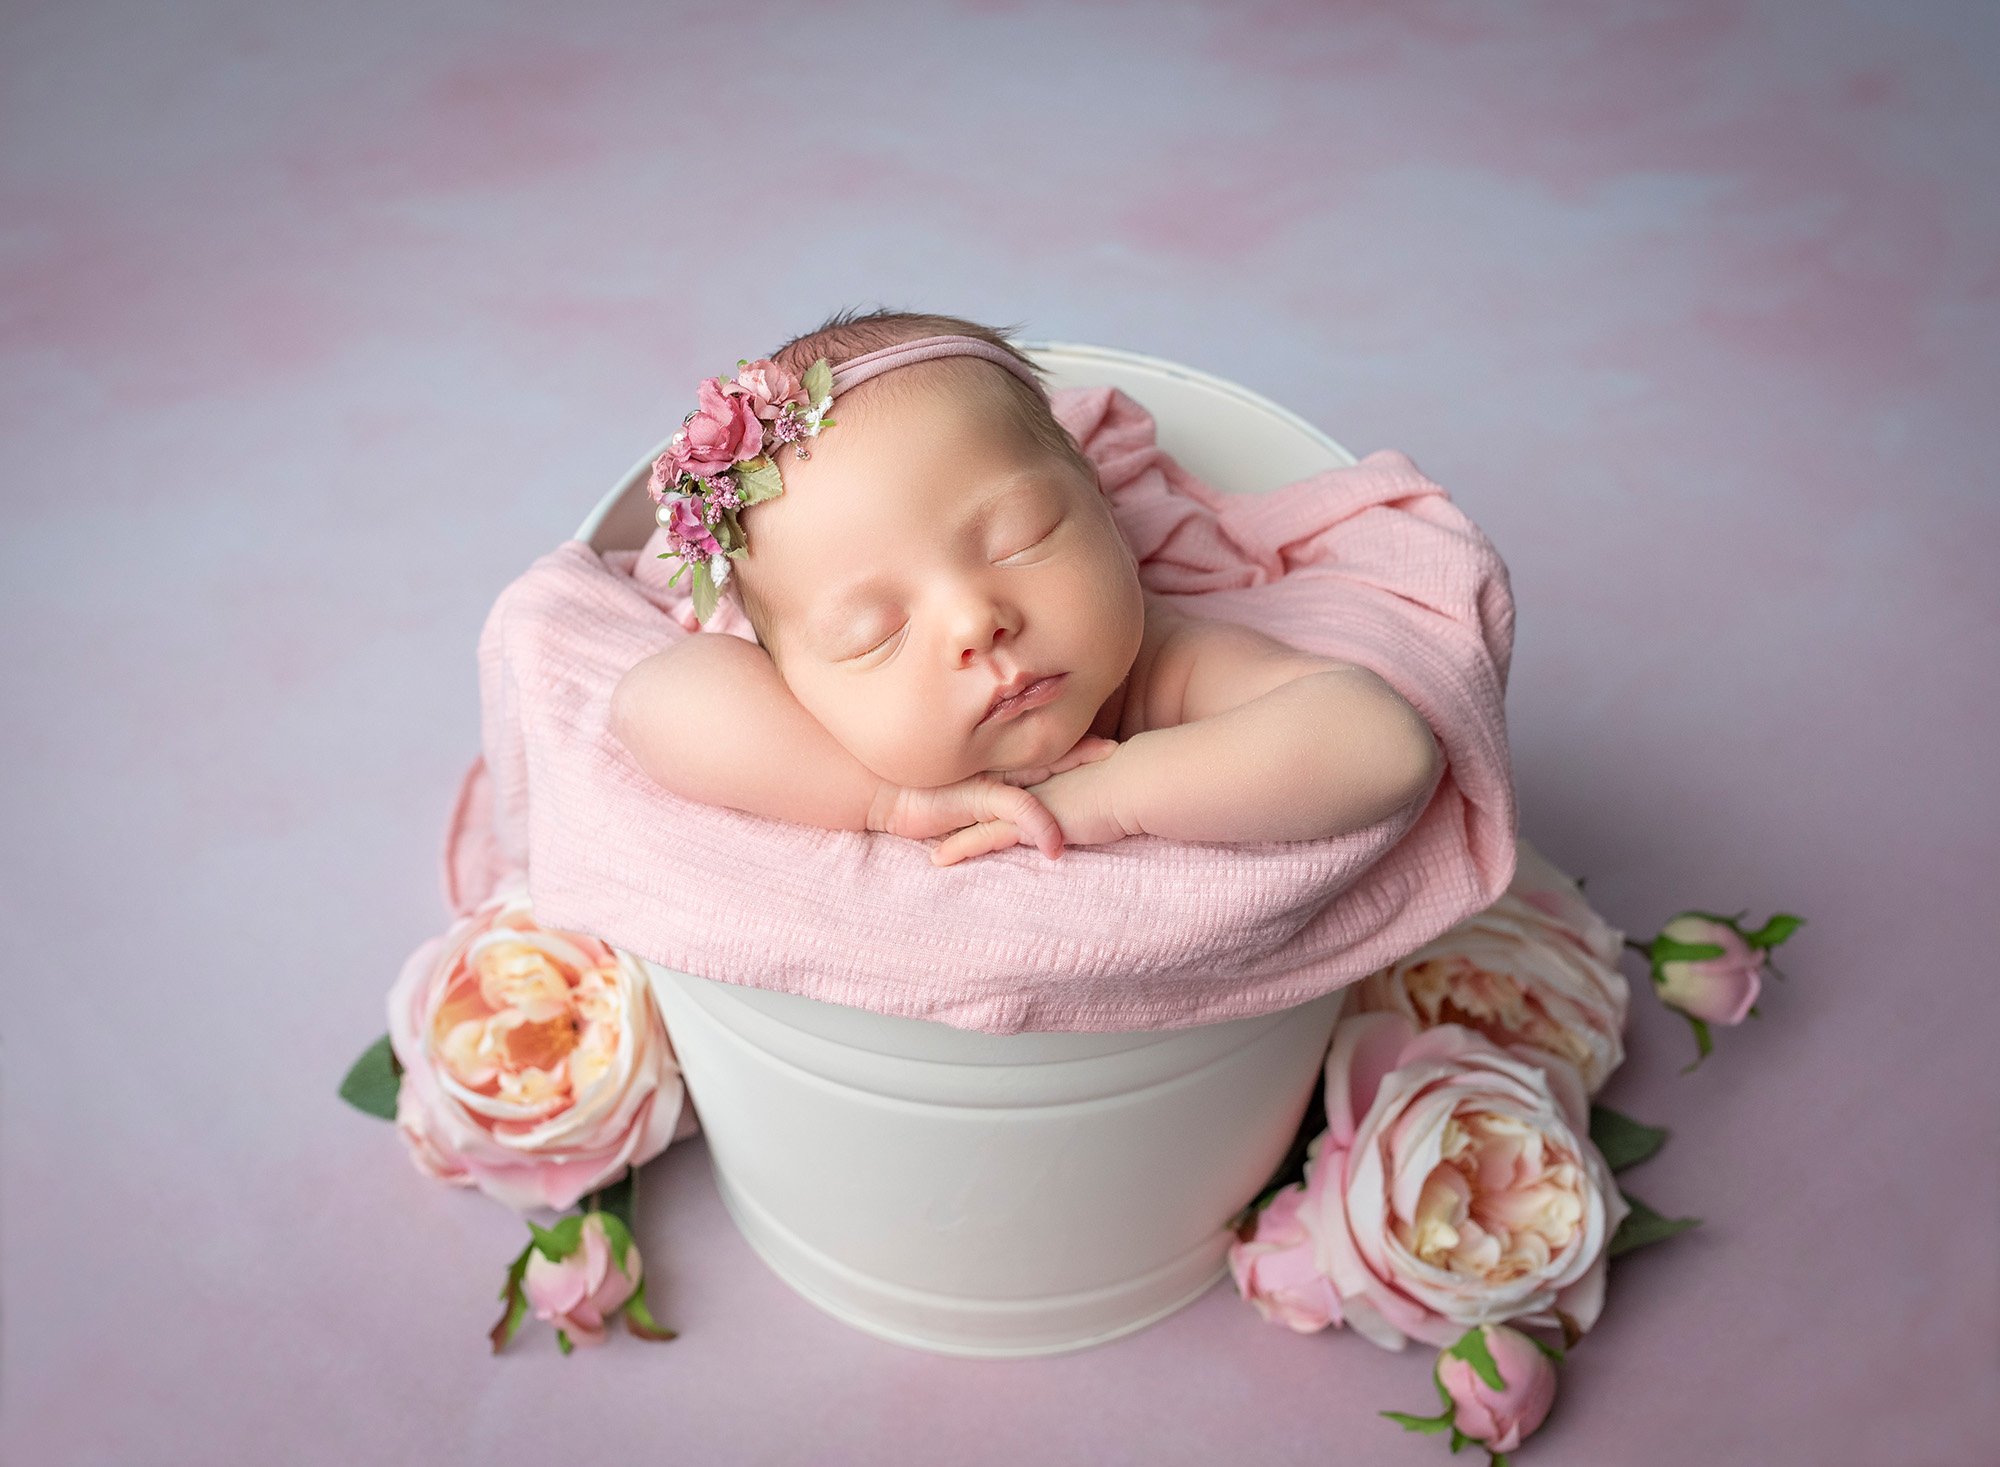 posed newborn photography baby sleeping with her head on her hands in a bucket